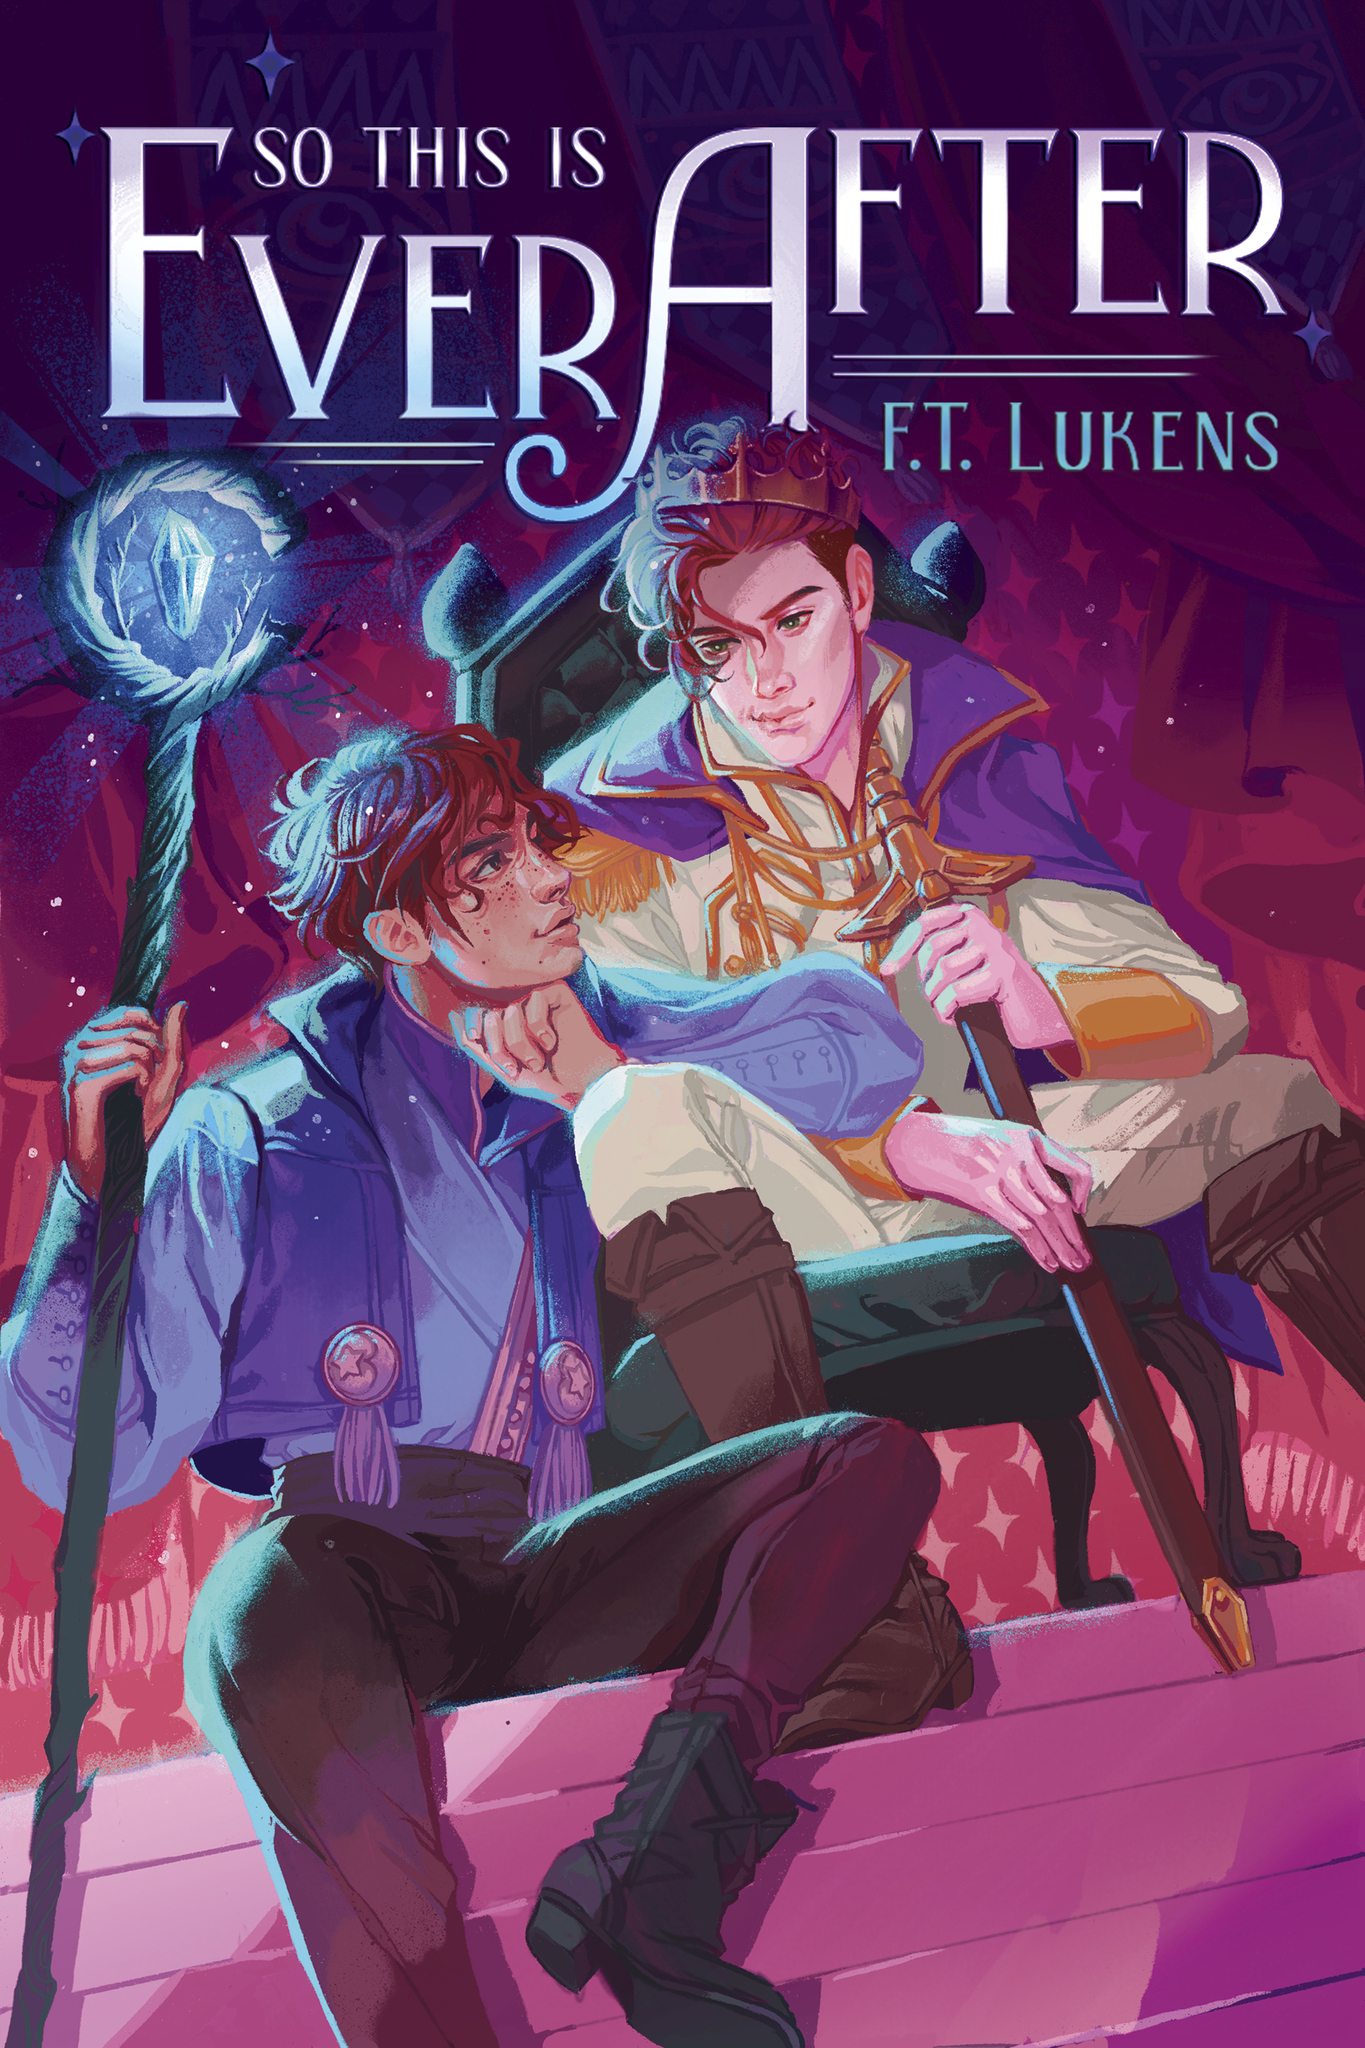 Growing Up Geek: Writing What I Know, a guest post by F. T. Lukens